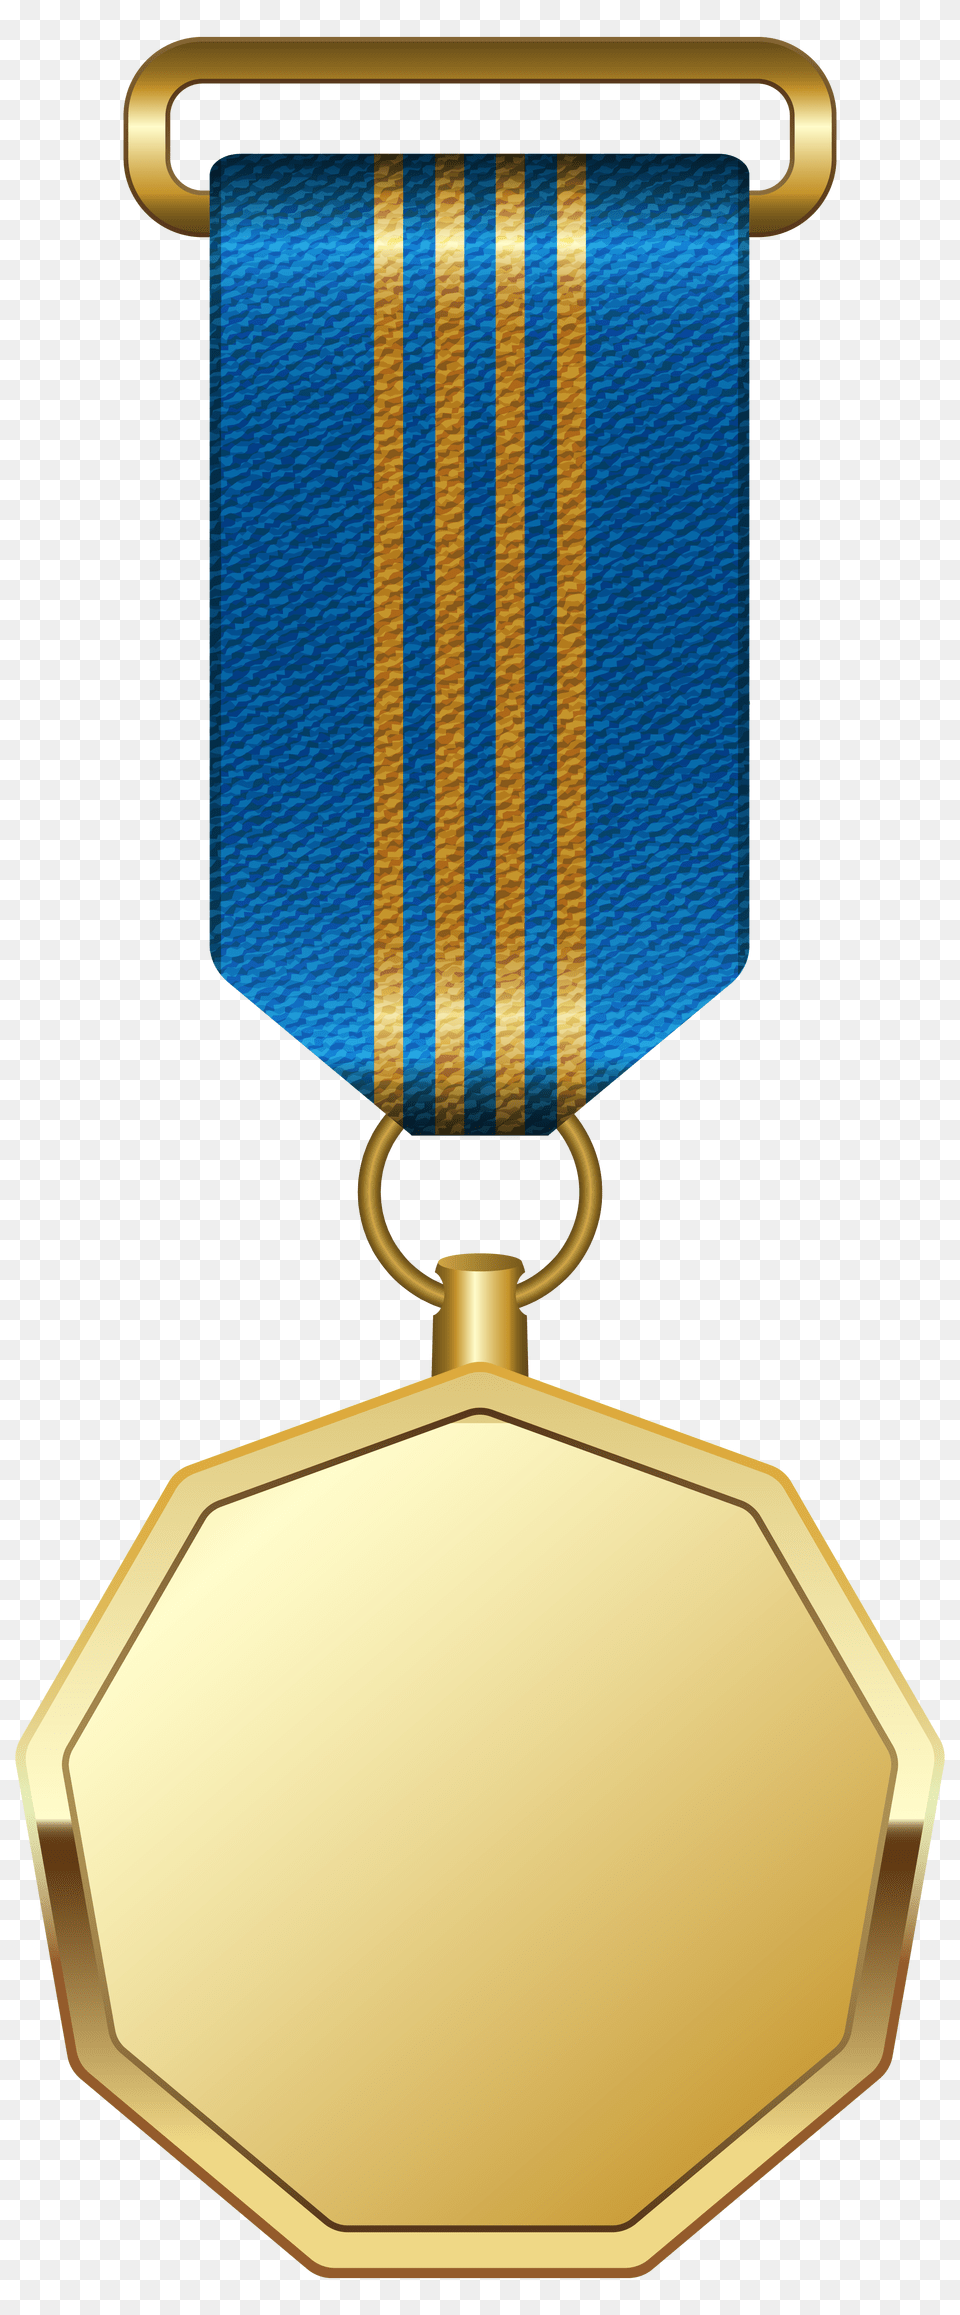 Gold Medal, Accessories, Formal Wear, Tie, Gold Medal Png Image